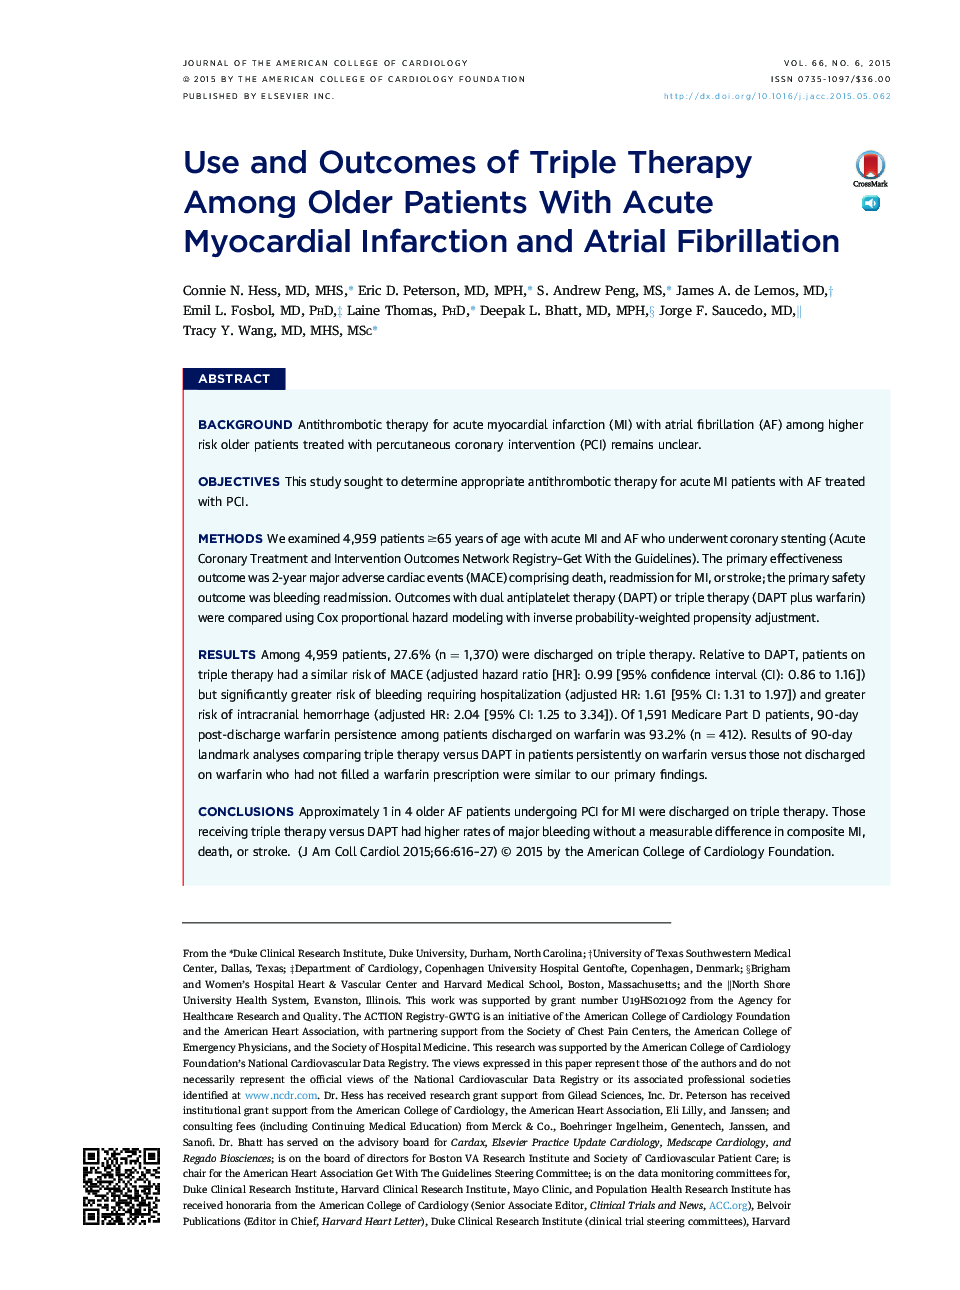 Use and Outcomes of Triple Therapy Among Older Patients With Acute Myocardial Infarction and Atrial Fibrillation 